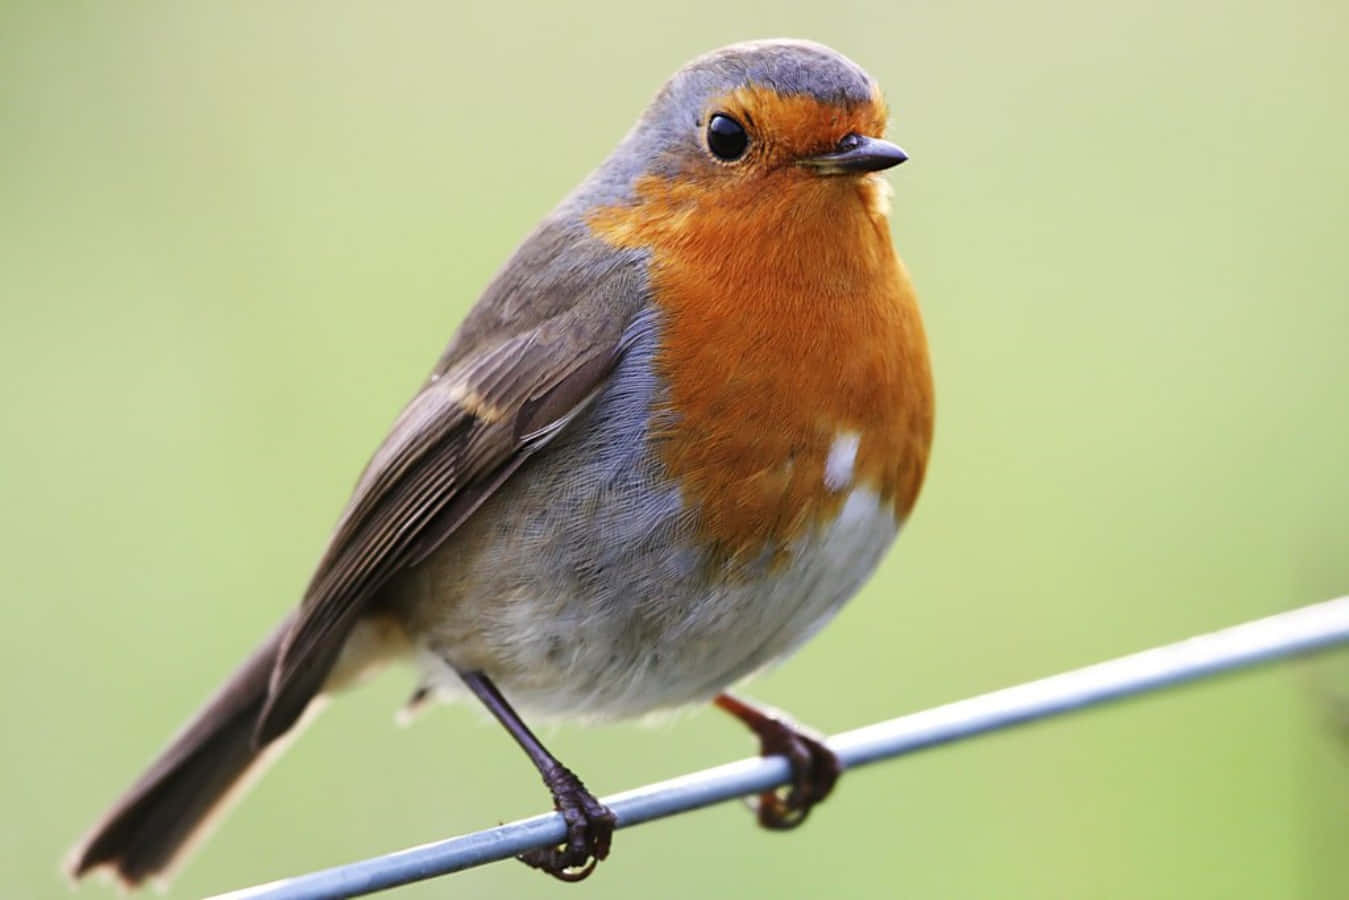 A Lovely Robin Enjoying The Outdoors